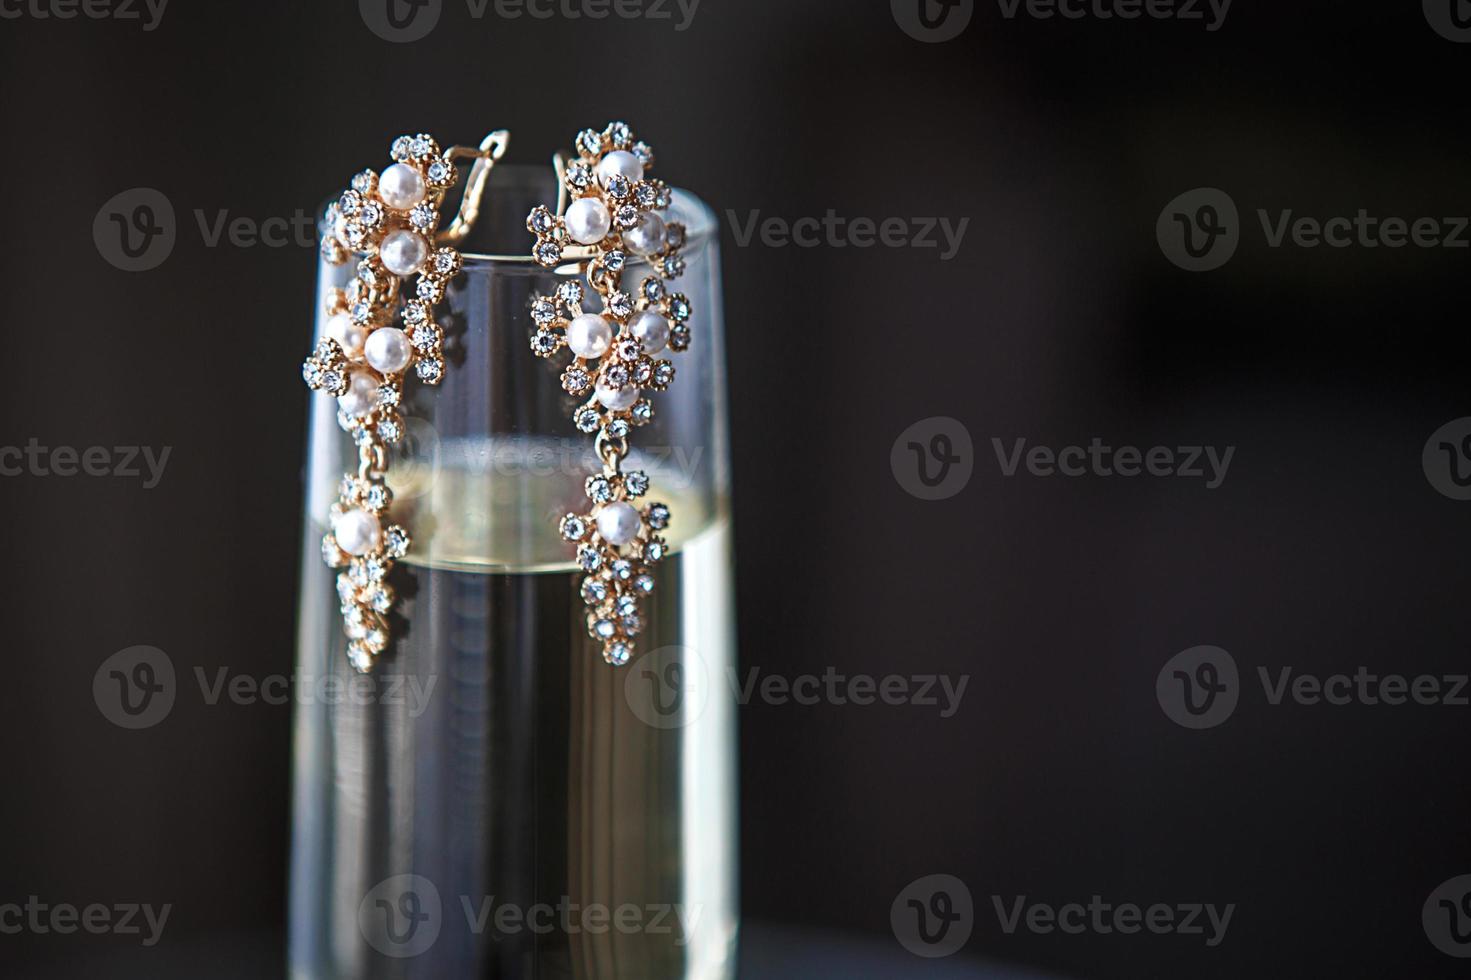 Large gold earrings with pearls and crystals on a clear glass of champagne. Morning and gathering of the bride, costume jewelry for the wedding celebration. Jewelry for the holiday. Black background, photo